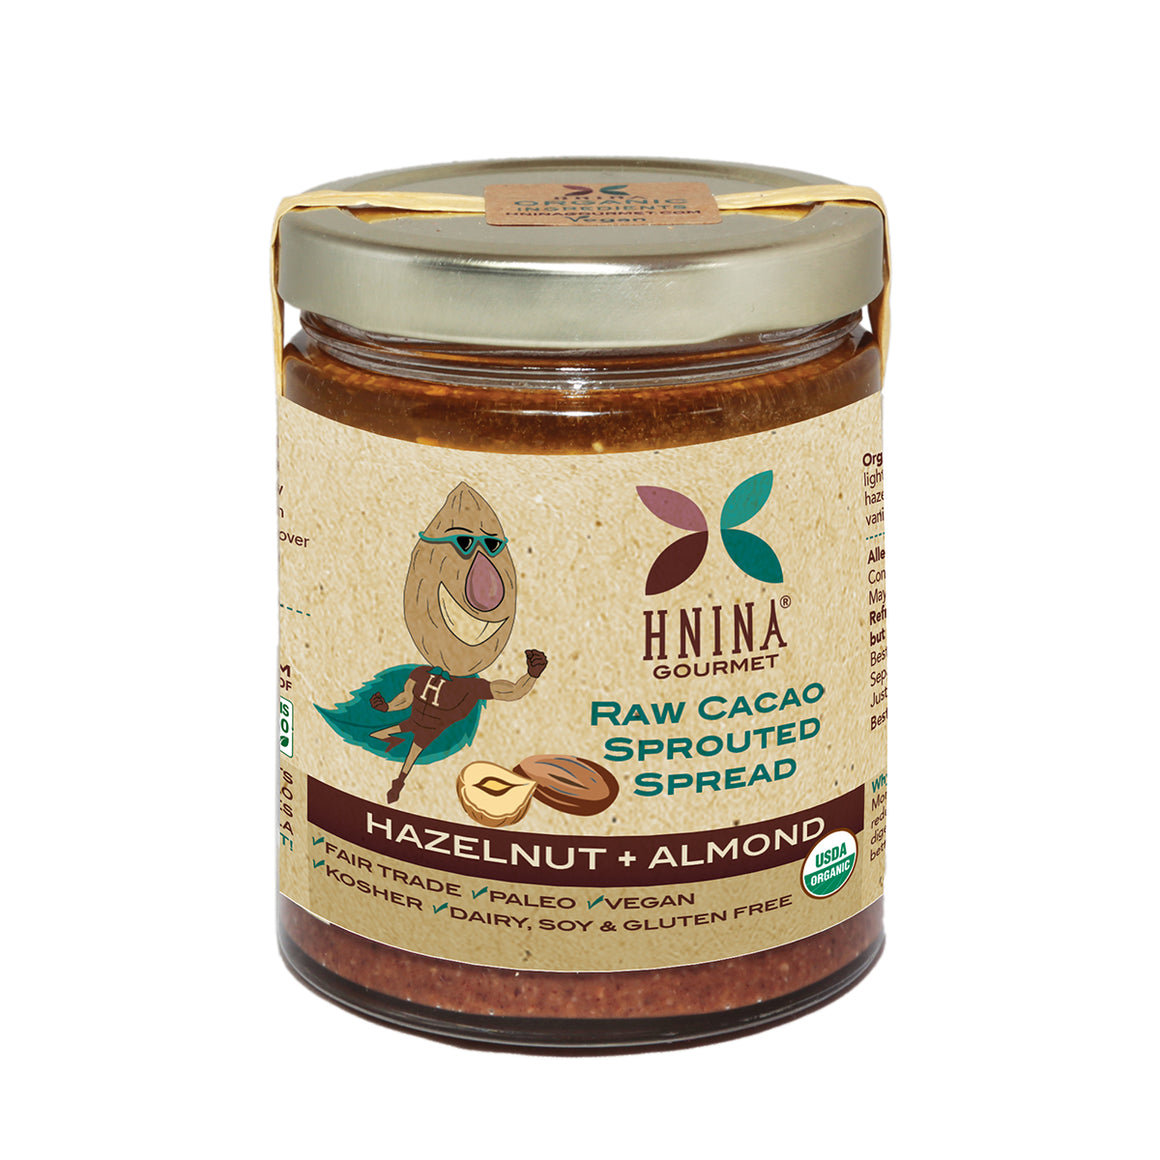 Raw Cacao Sprouted Spread: HAZELNUT + ALMOND.  The perfect Nutella replacement.